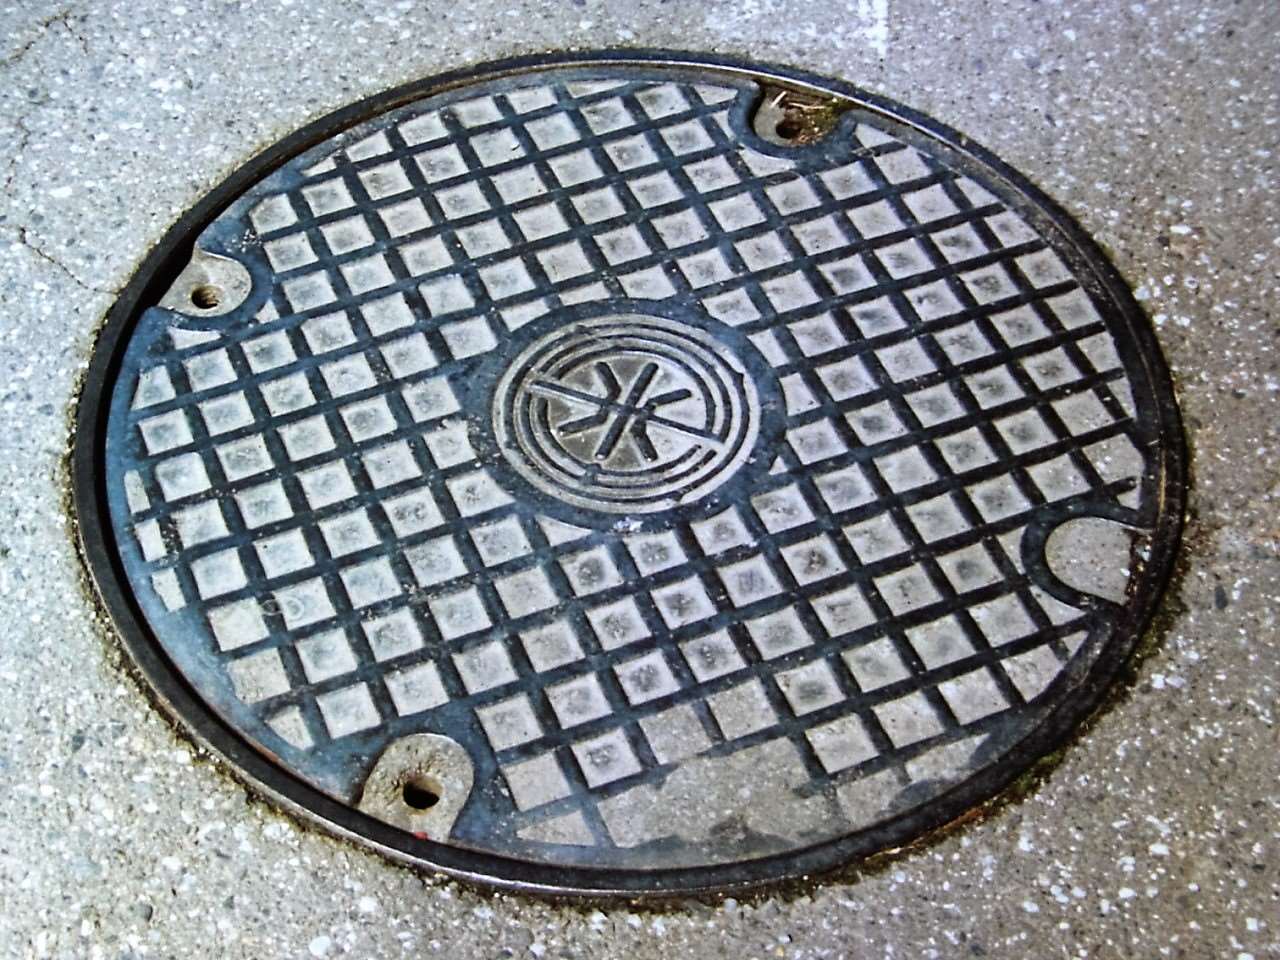 The object turned out to be a drain cover. Stock image - wikimedia